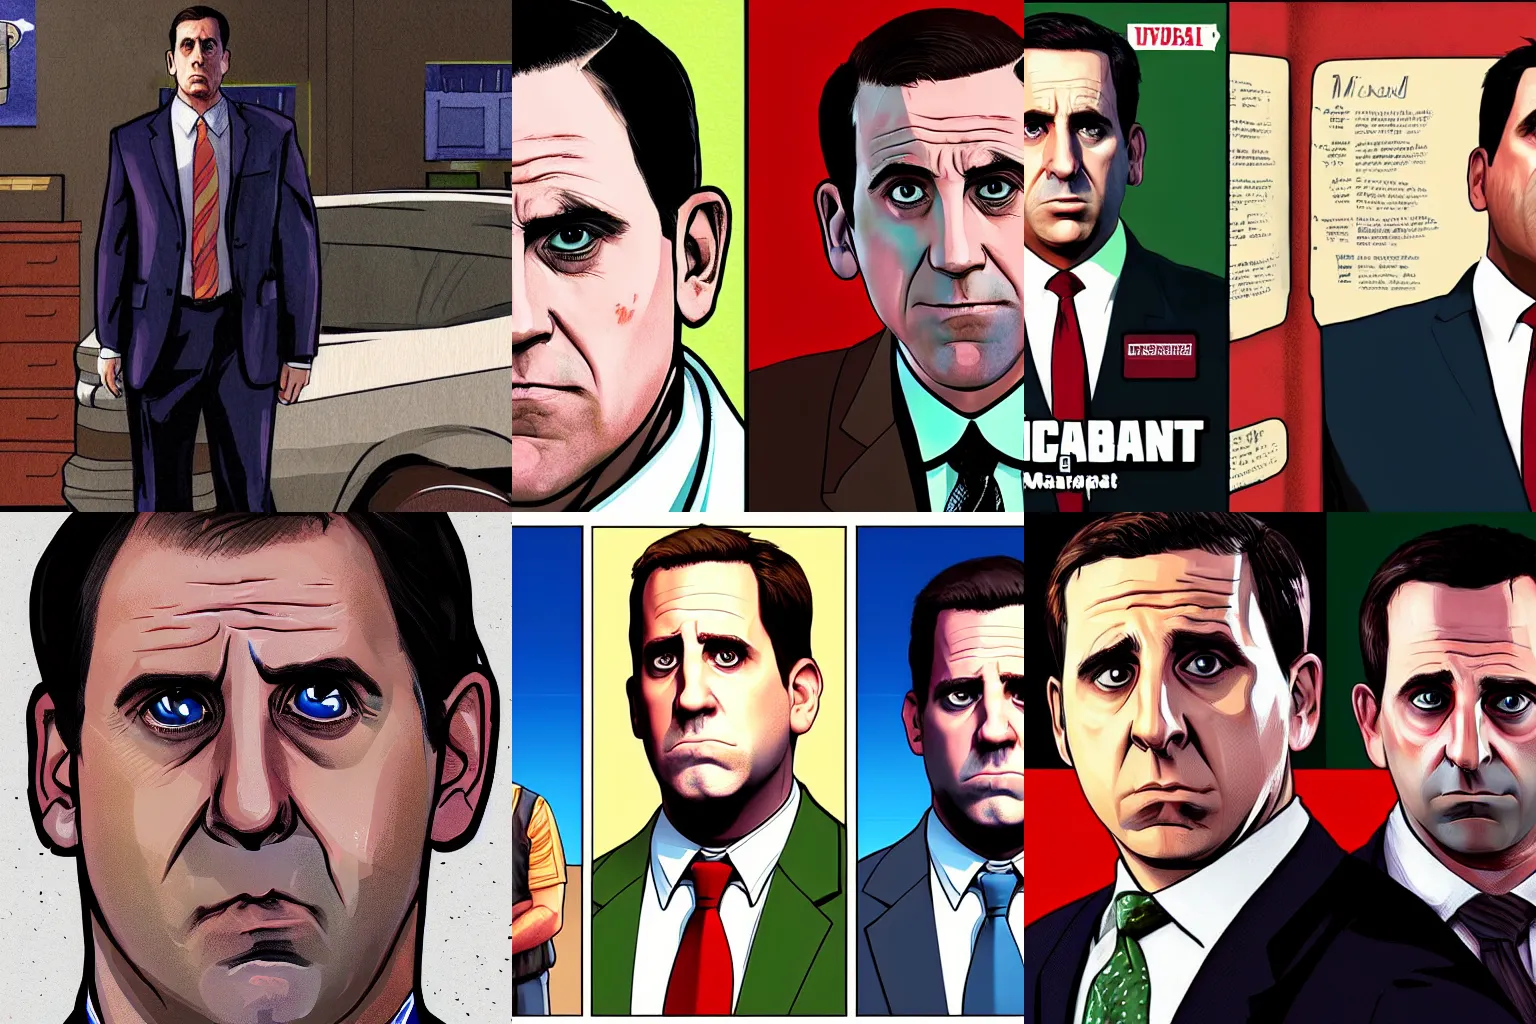 Prompt: illustrated portrait of a confused Michael Scott from The Office played by Steve Cartell, illustrated by Anthony Macbain, GTA V cover art